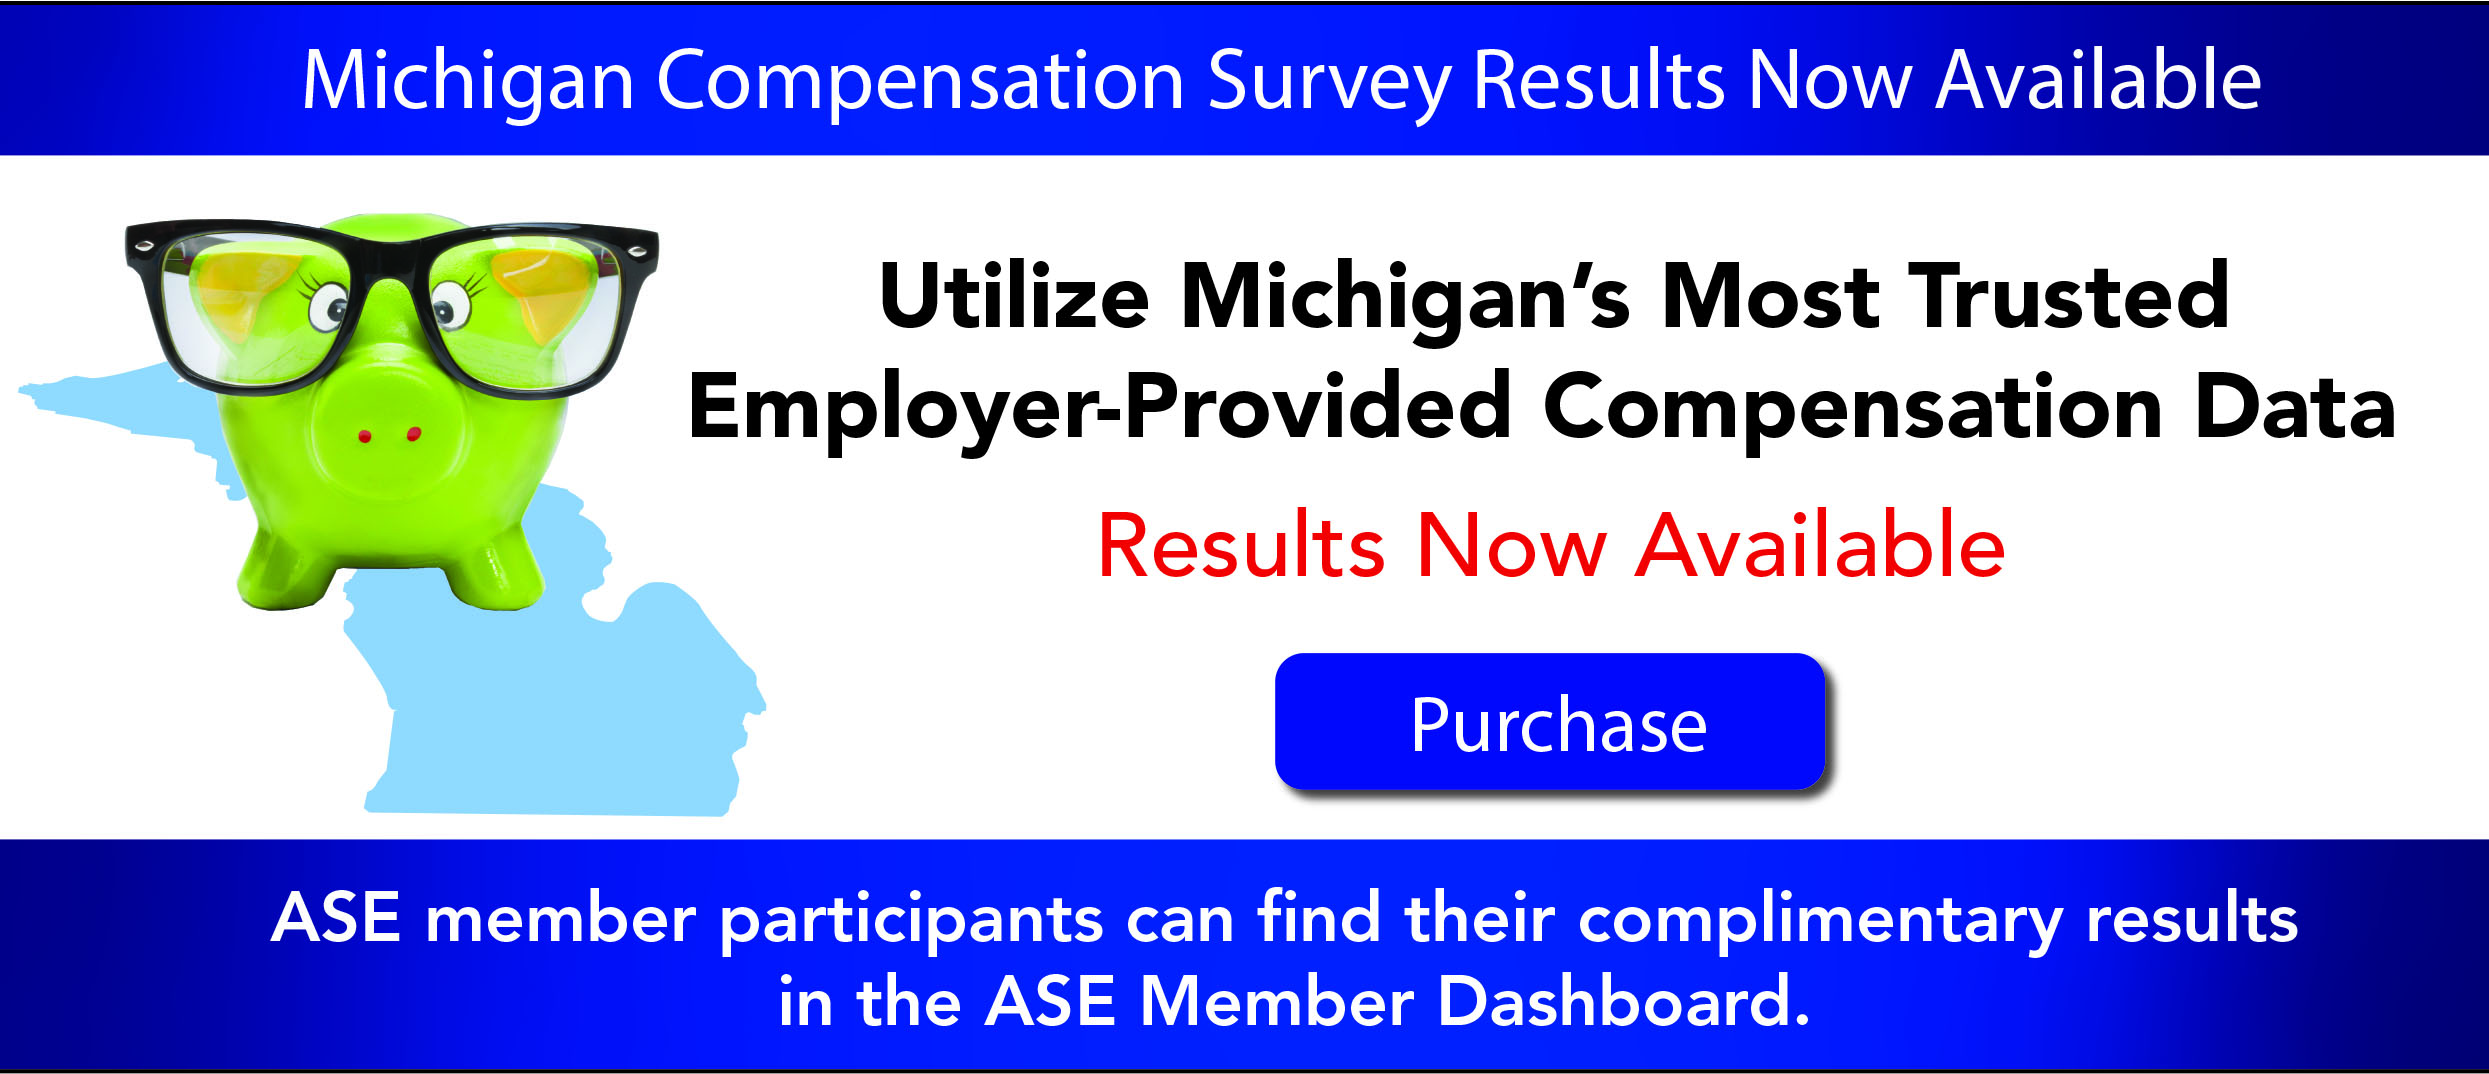 2021 Michigan Compensation Survey Available for Purchase